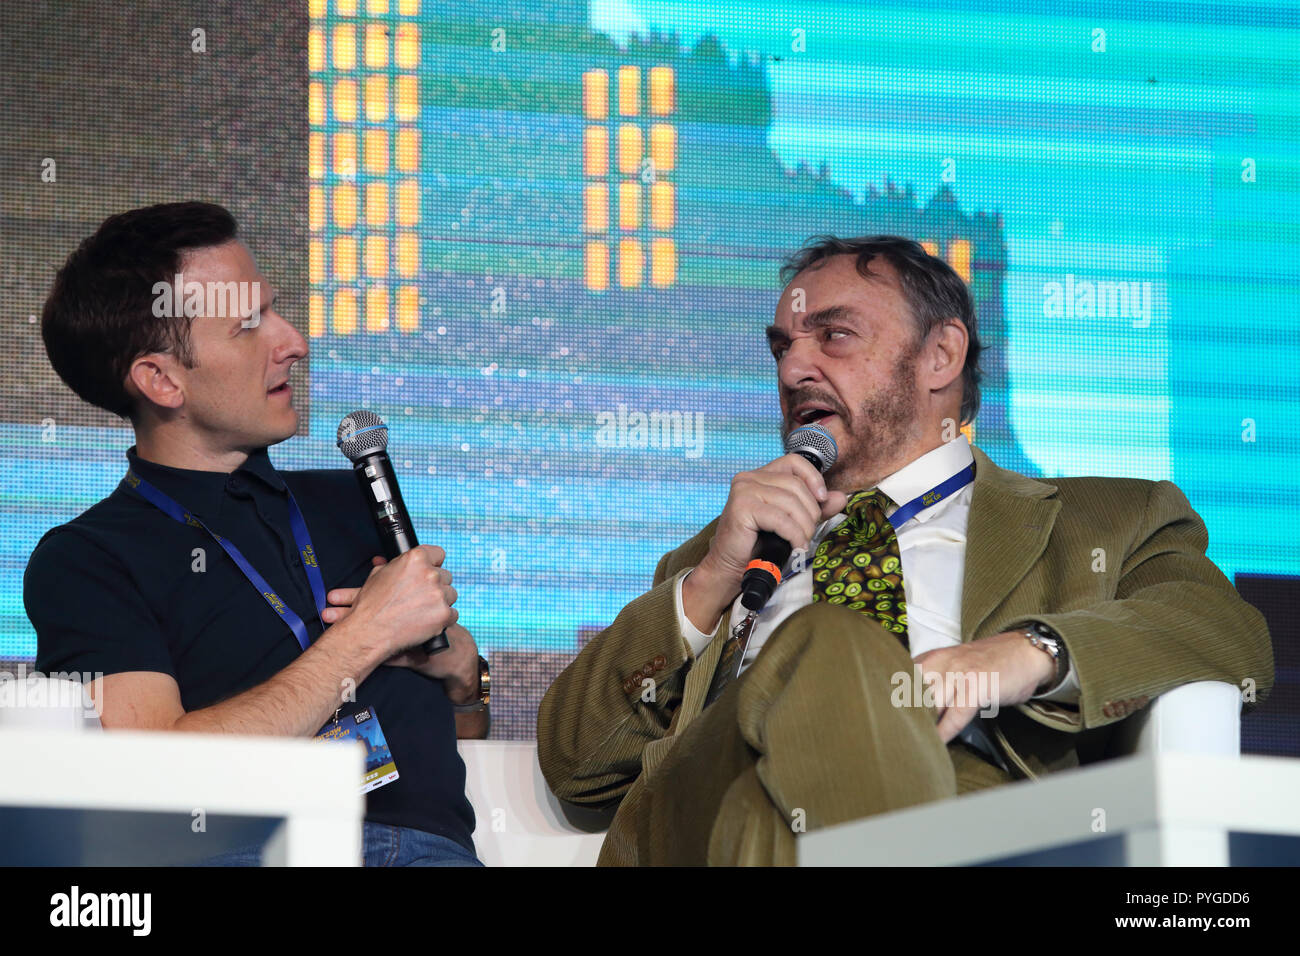 PTAK Warsaw Expo, Nadarzyn, Poland. October 27th, 2018. 4th edition of Warsaw Comic Con at  PTAK Warsaw Expo in Nadarzyn, Poland. Pictured: (L-R) Adam Brown and John Rhys-Davies © Piotr Zajac/Alamy Live News Stock Photo